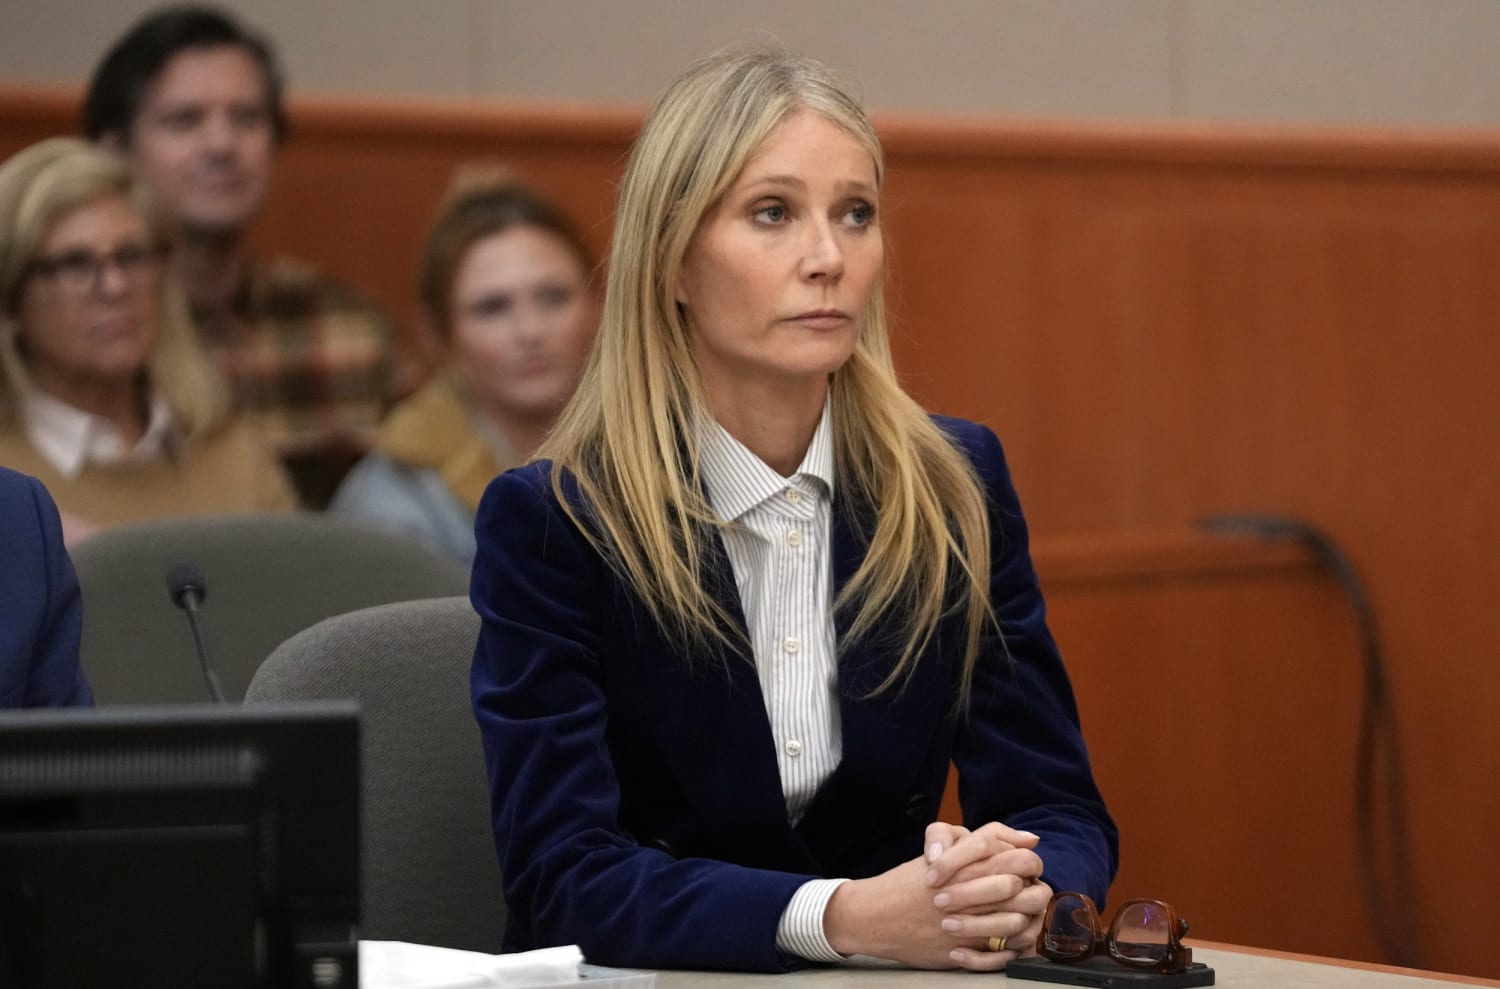 The Gwyneth Paltrow trial is over, but the internet isn't done with it